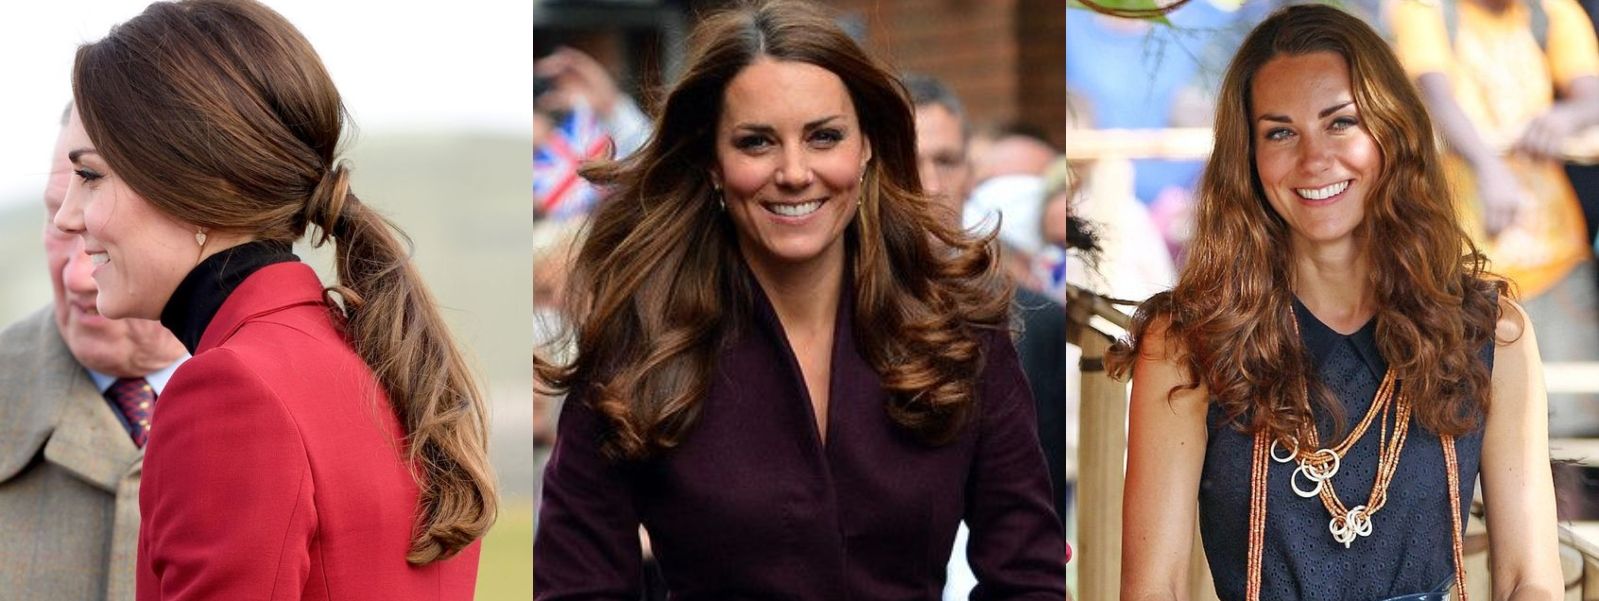 images easyblog articles 11510 kate middleton hair style4 5d4509aa